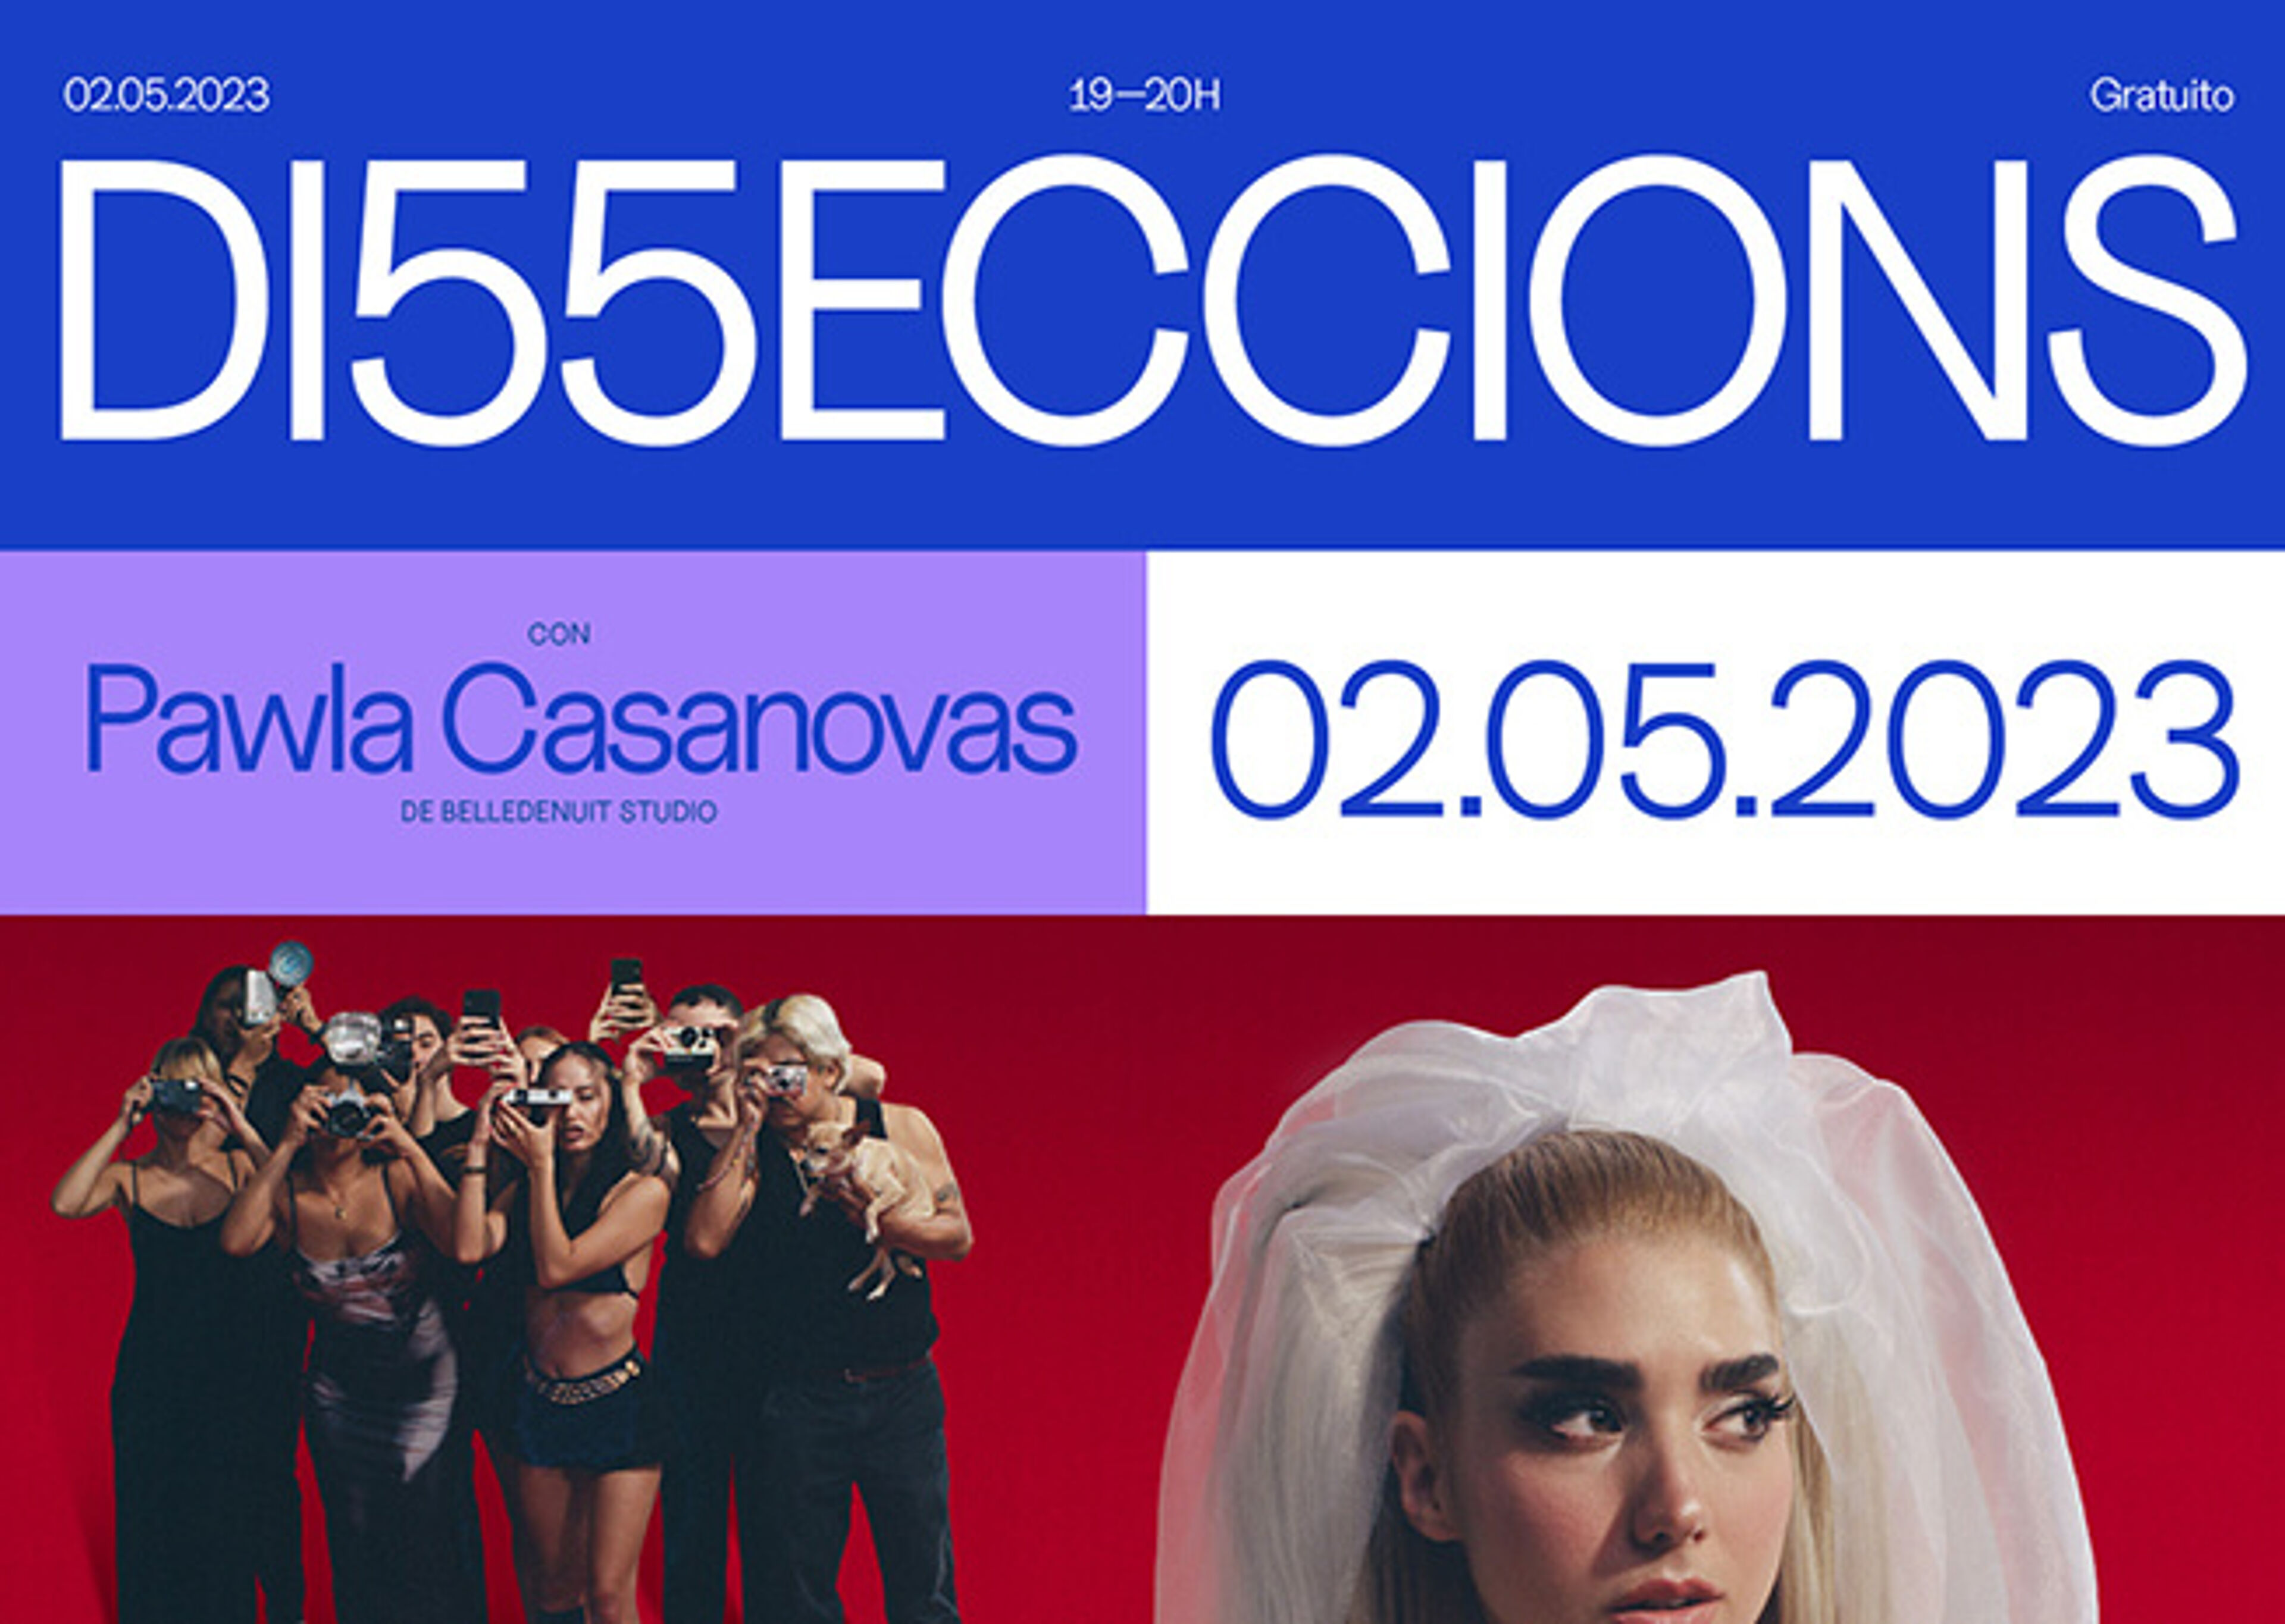 Poster for 'D15ECCIONS' art exhibition on May 2, 2023, featuring Pawla Casanovas, with a group of masked people and a bride.